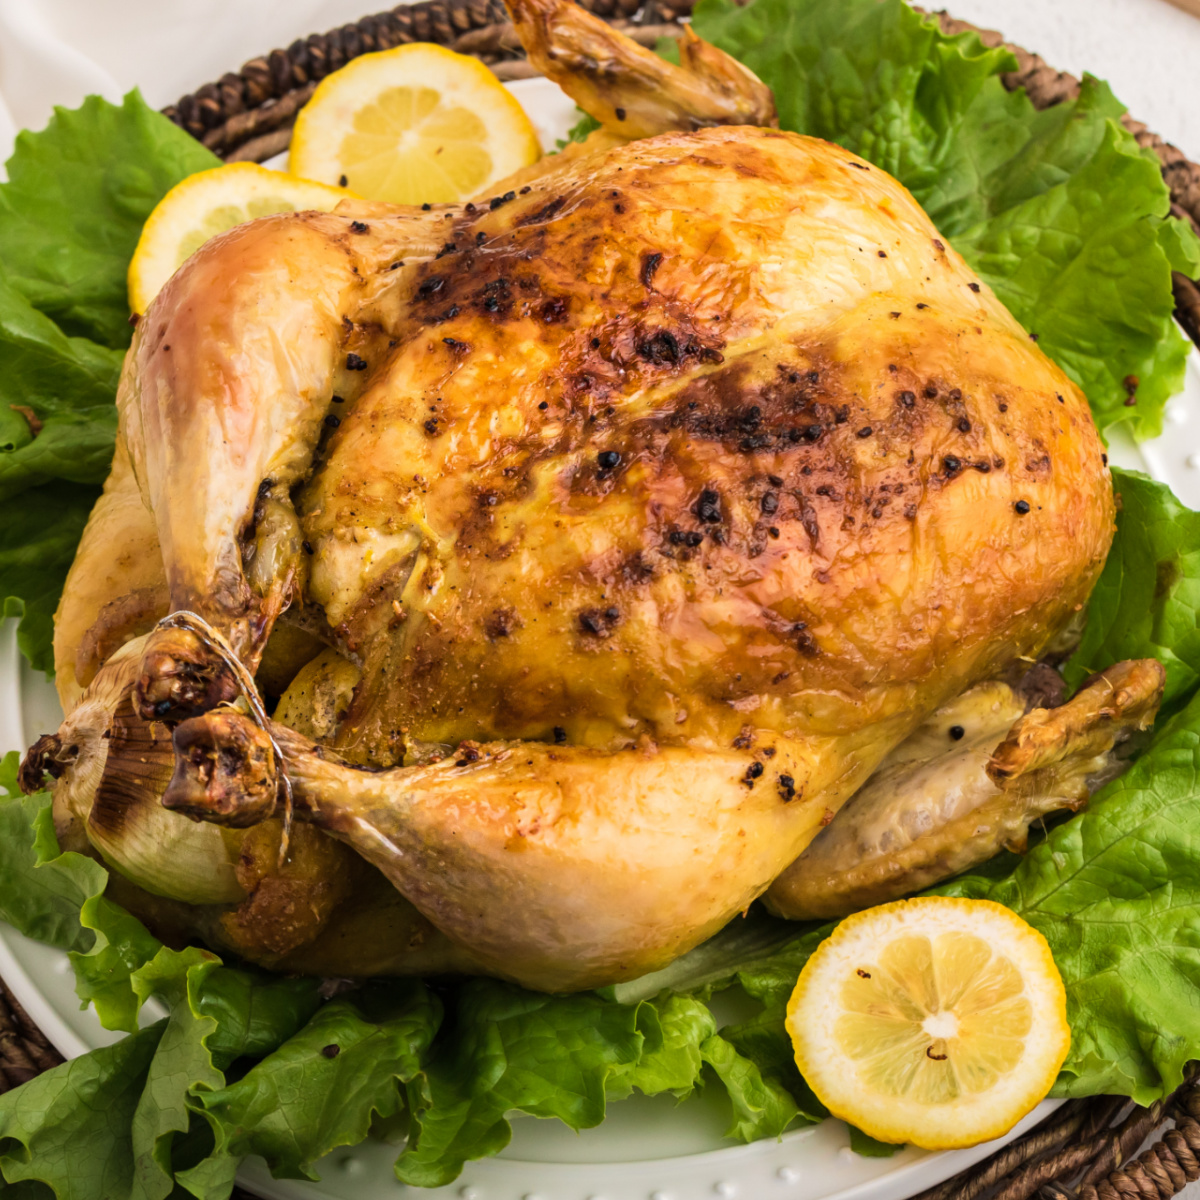 Slow Roasted Whole Chicken on a bed of lettuce with lemons.